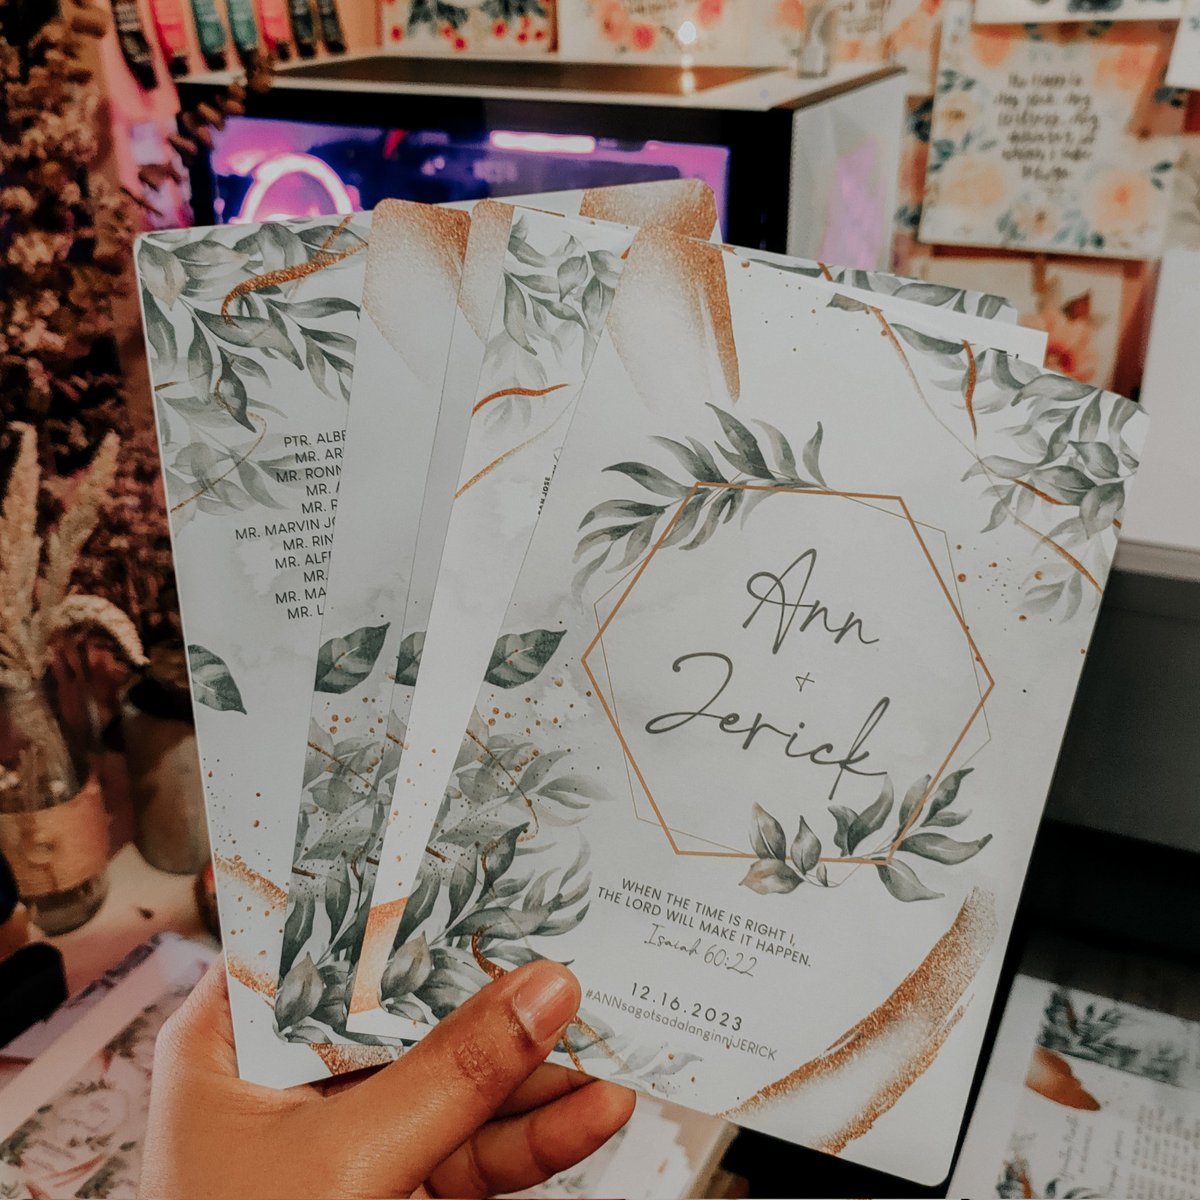 Recent works ✨ — 𝗪𝗘𝗗𝗗𝗜𝗡𝗚 ⋒ Wedding Invitations ⋒ Save the dates ⋒ Wedding Table Cards ⋒ Wedding Thank You Cards ⋒ His and Hers Vow ⋒ Bridesmaid Cards ⋒ Wedding Signage 💬 DM for inquiries m.me/illustrateiivy 🛒 Shop via Shopee shopee.ph/illustrateivys…